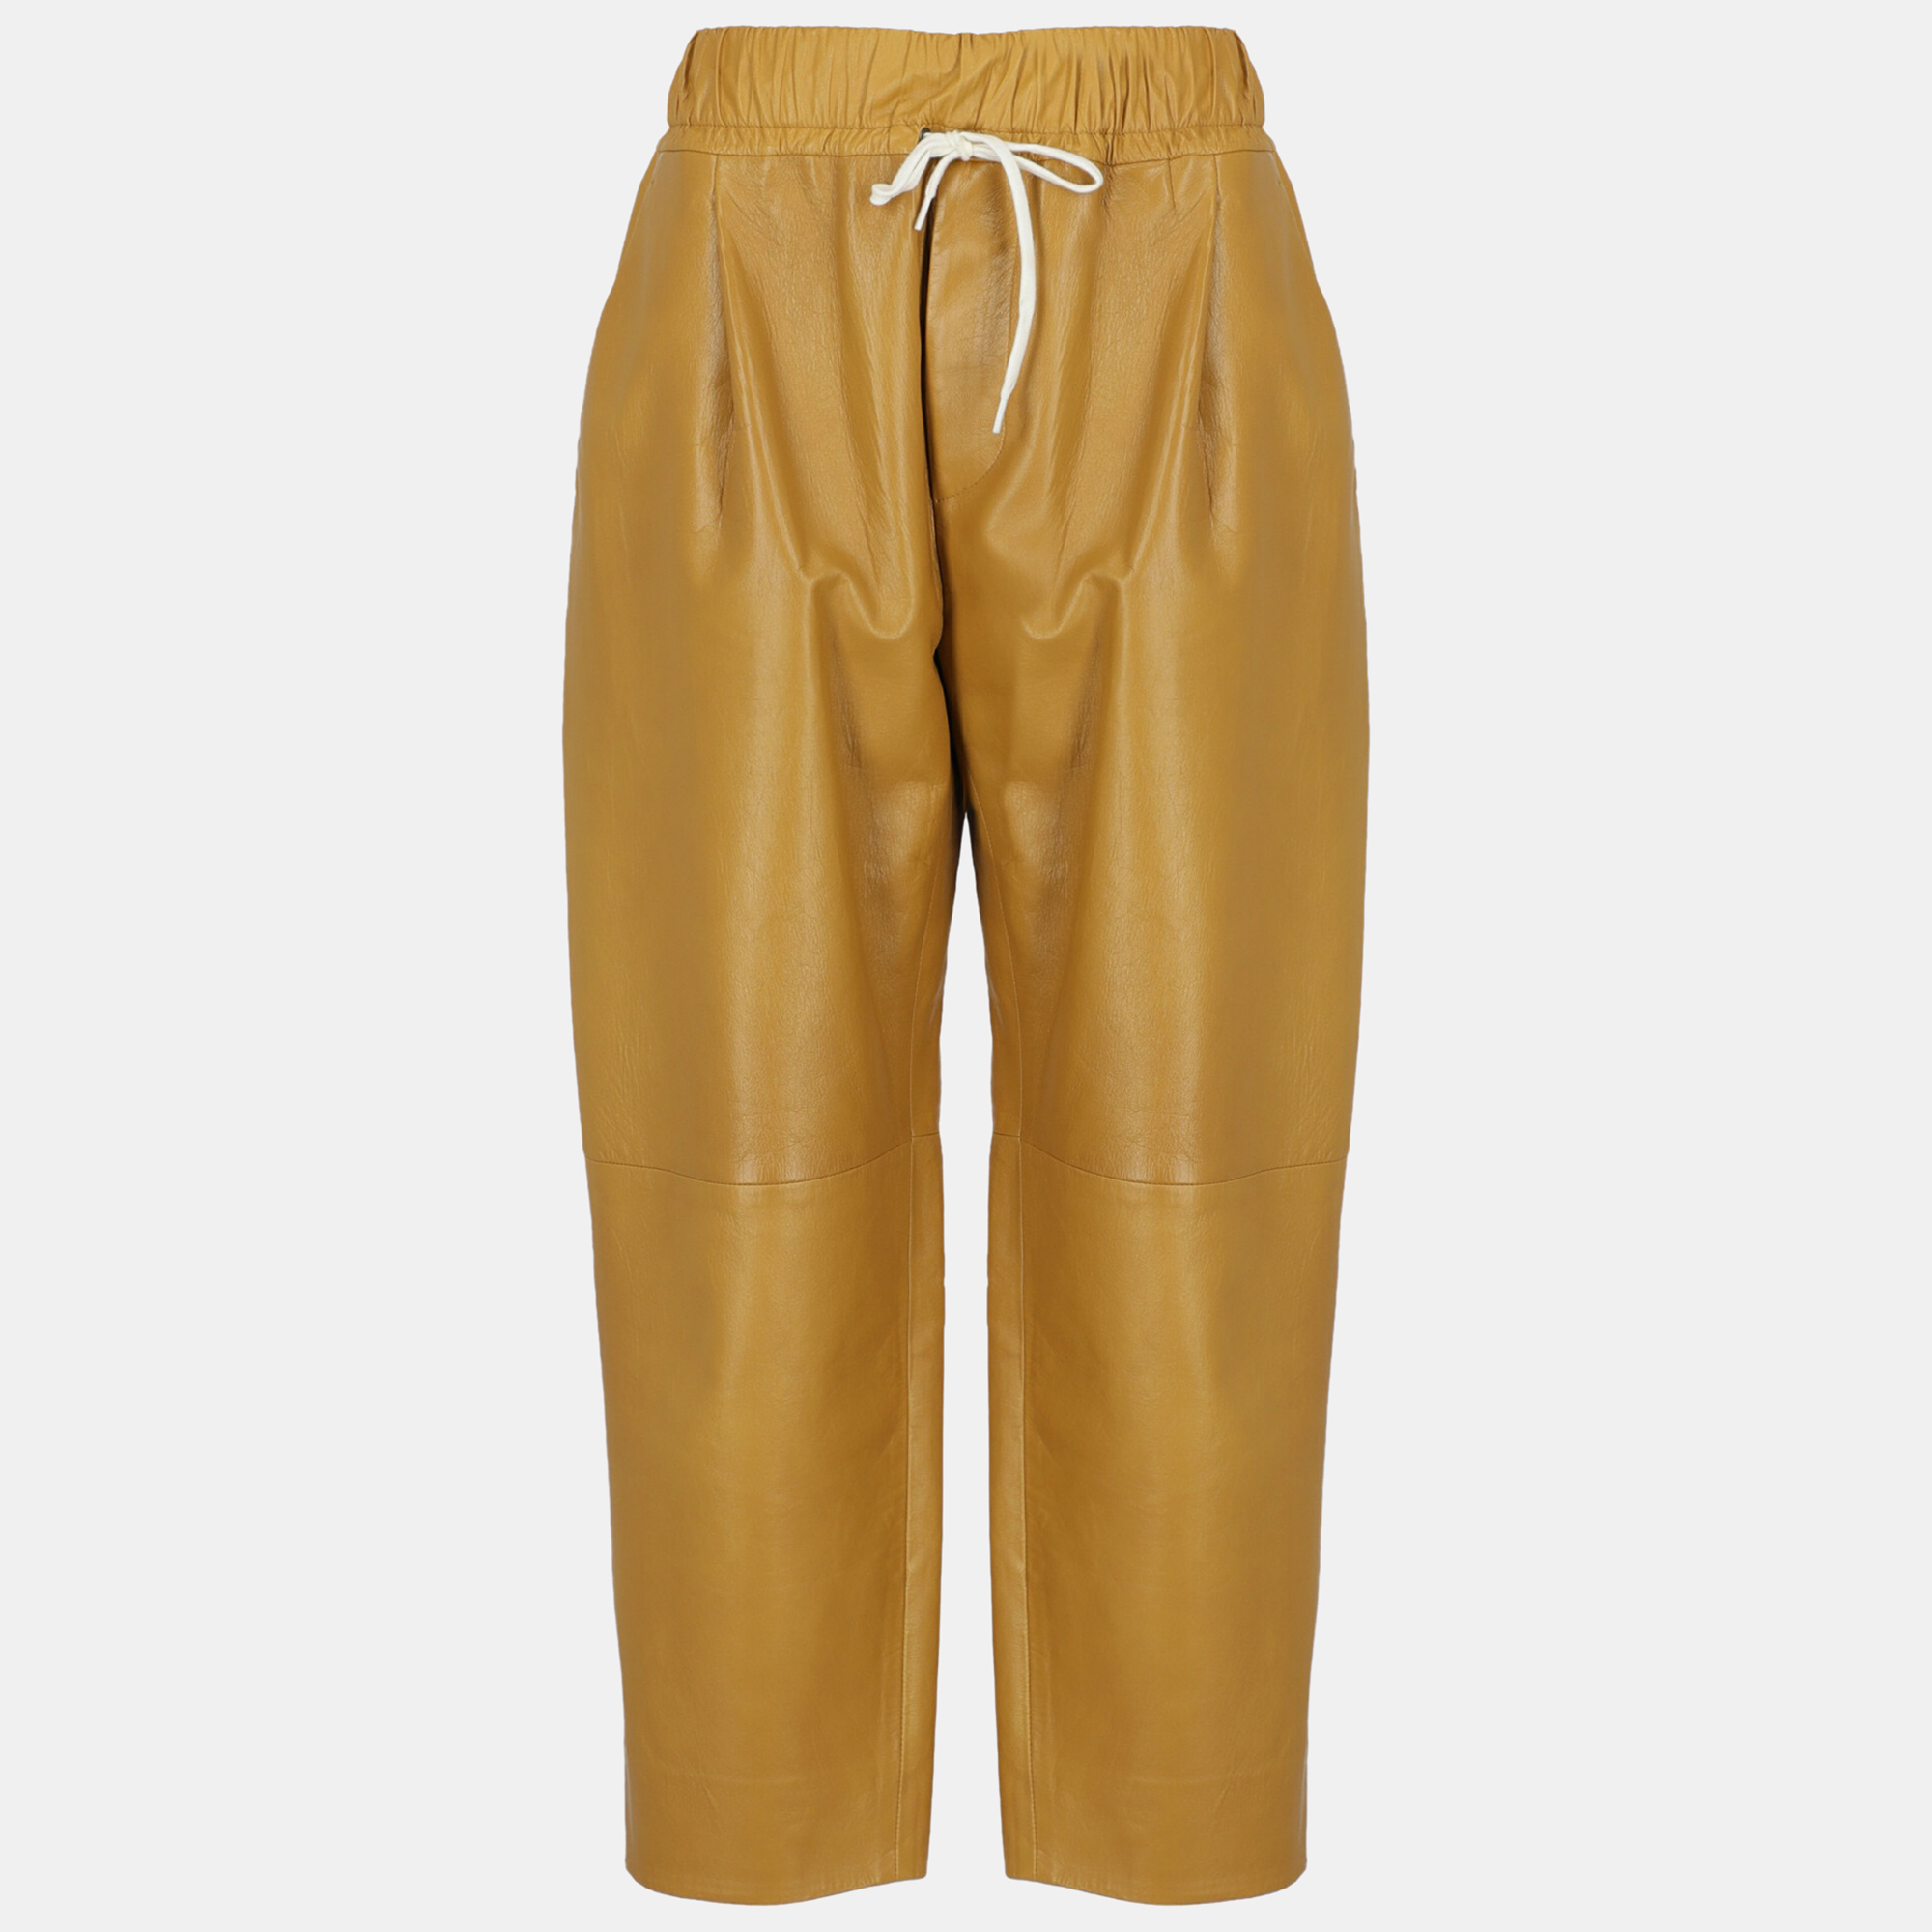 Givenchy  Women's Leather Trousers - Camel Color - S